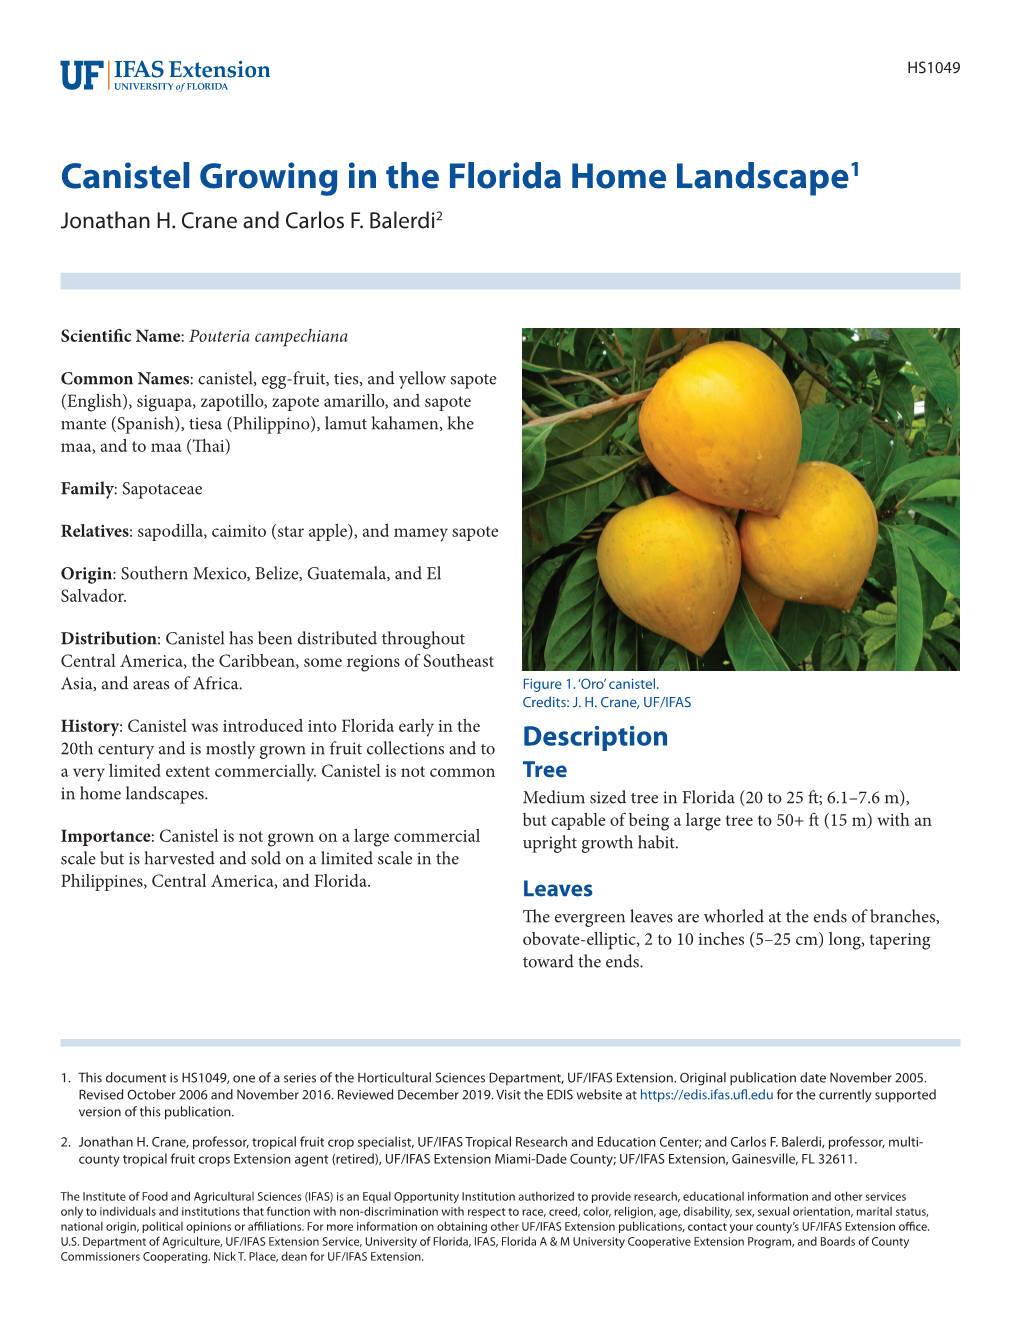 Canistel Growing in the Florida Home Landscape1 Jonathan H